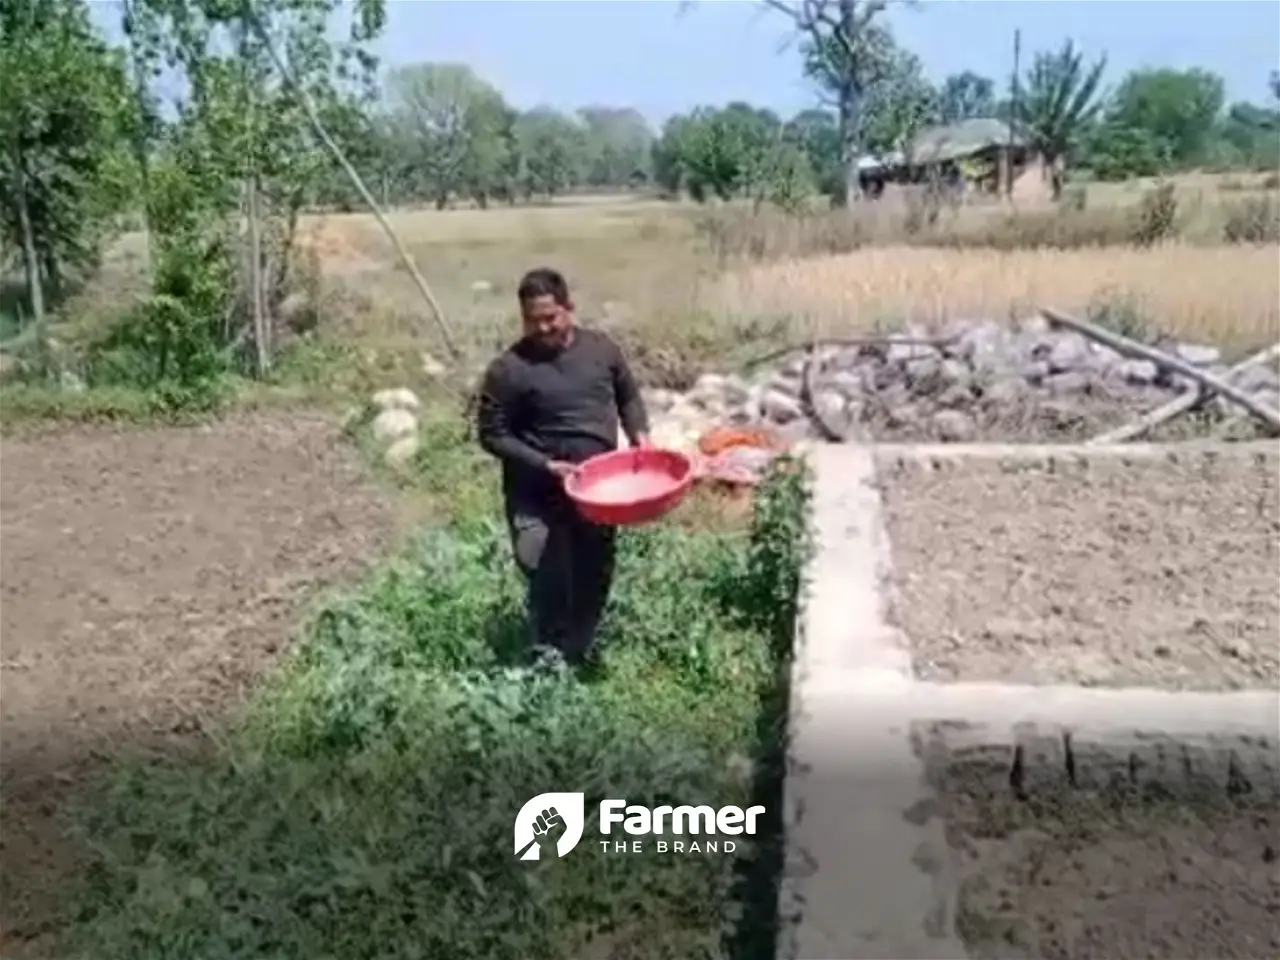 Build work and life in your villages says a Farmer from Kangra